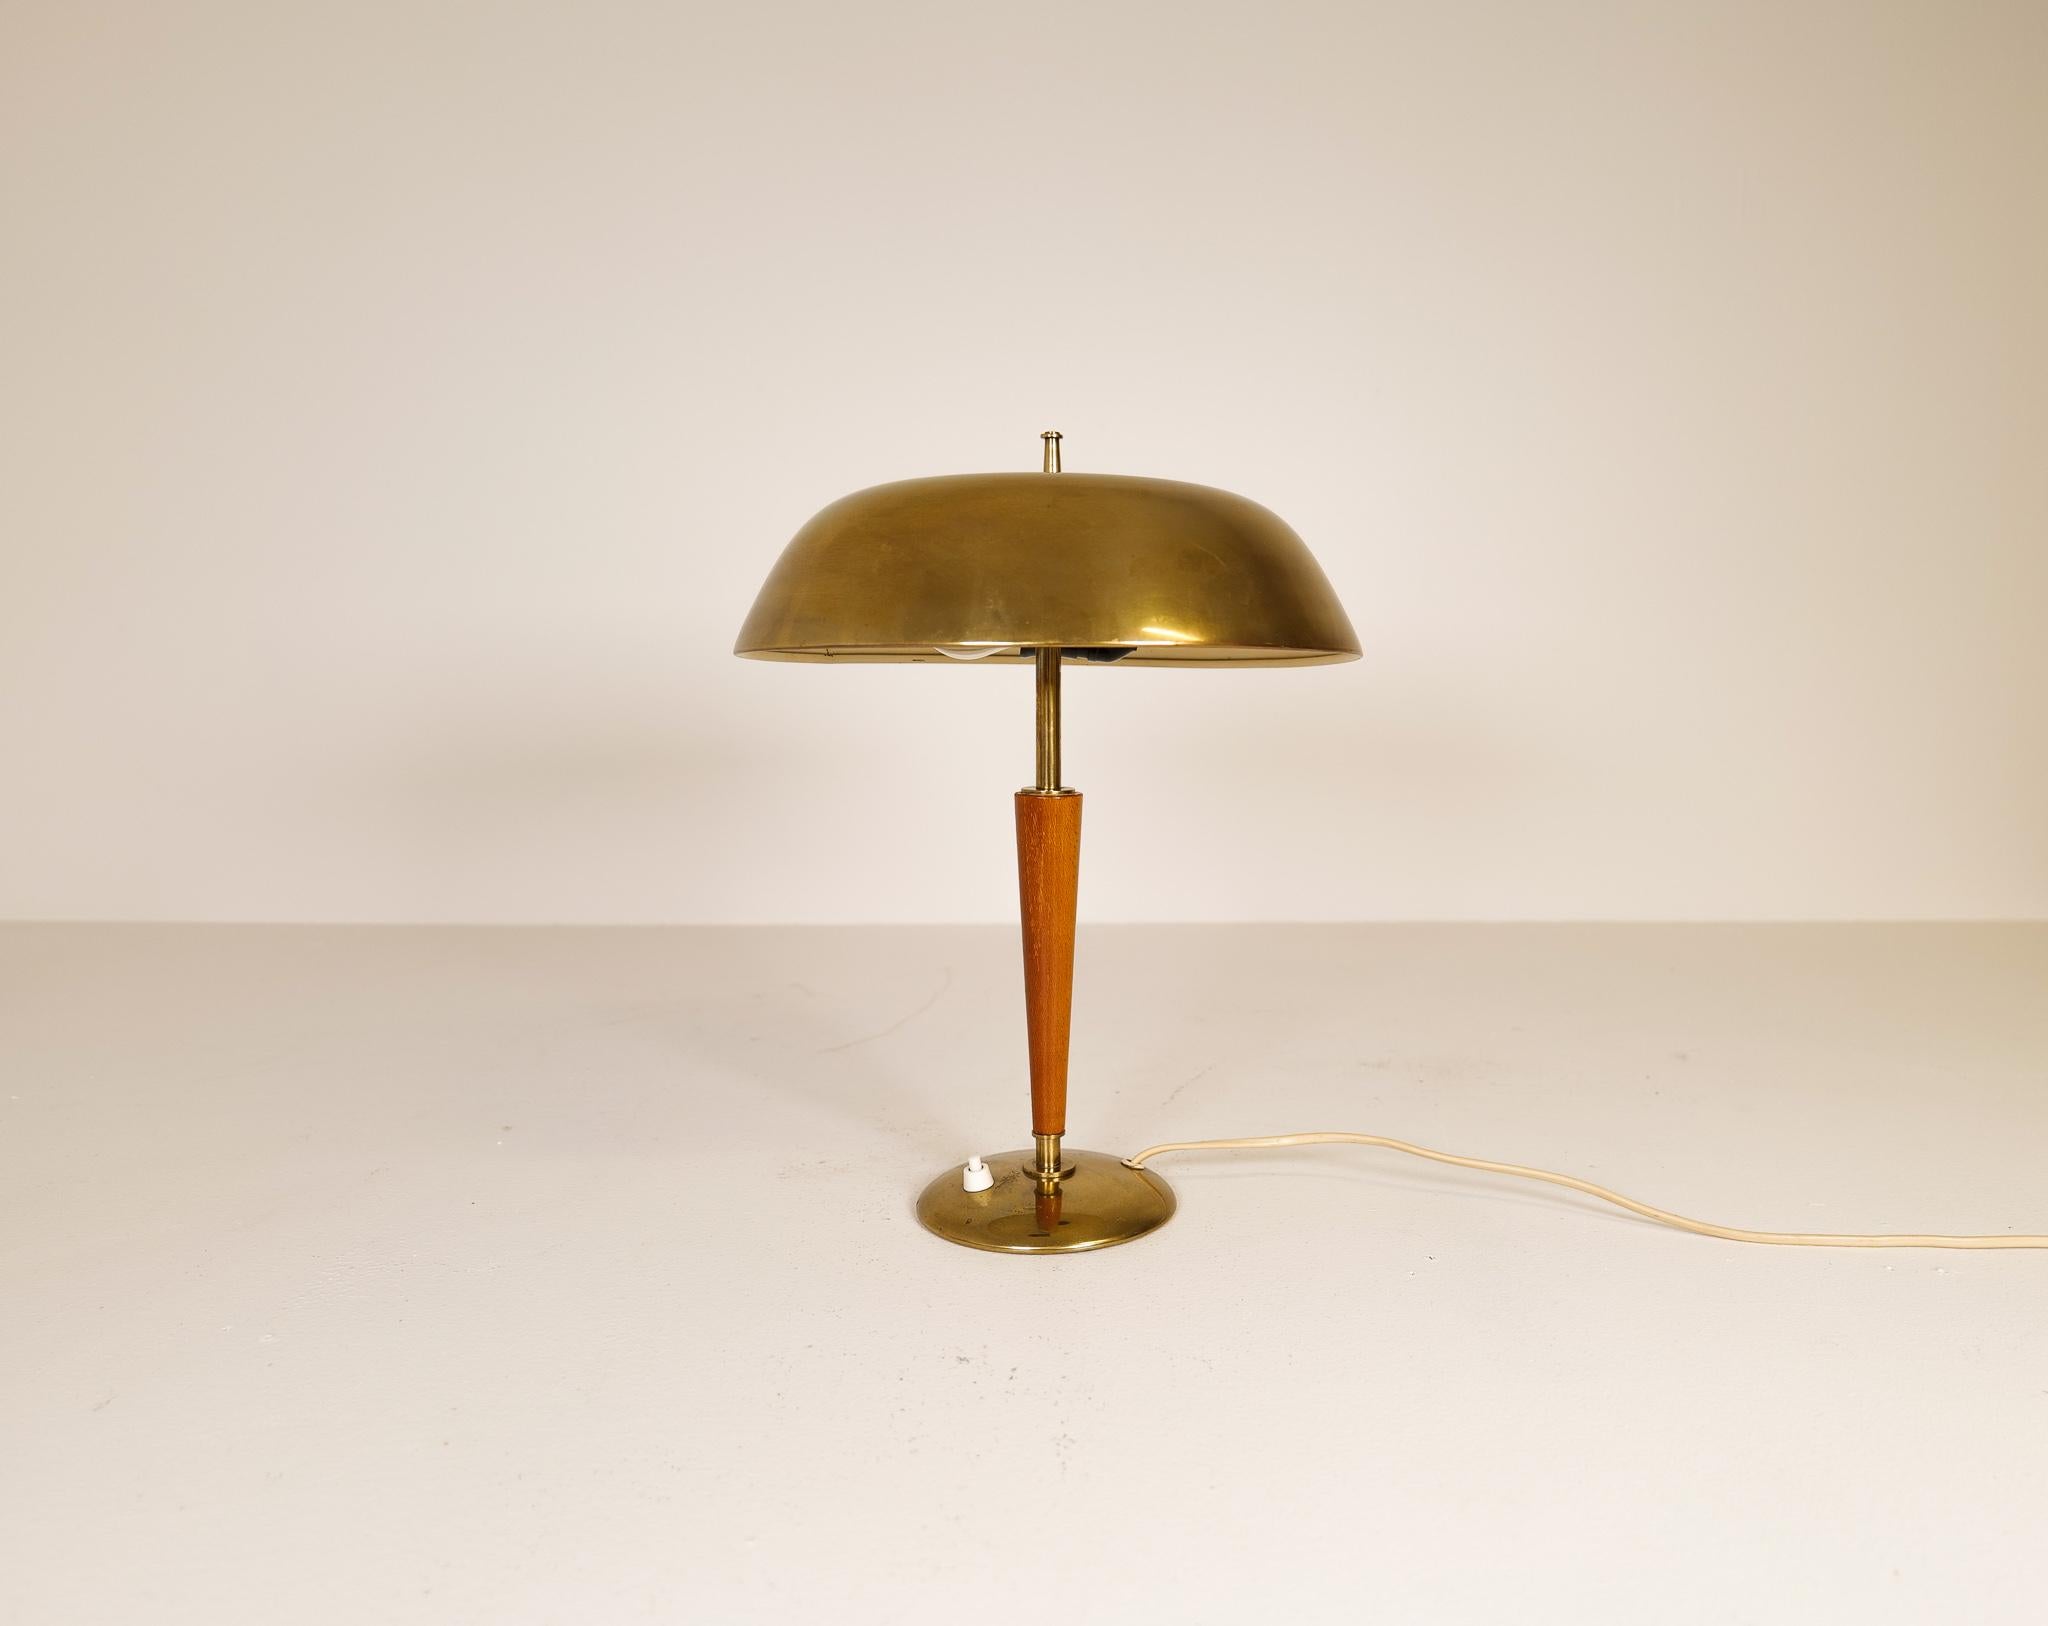 This table lamp produced in the late Art Deco period was created and manufactured at Nordiska Kompaniets factory in Sweden. The NK (Nordic Company) was the go-to store during this time, and their inventory was of high quality. This lamp made with a